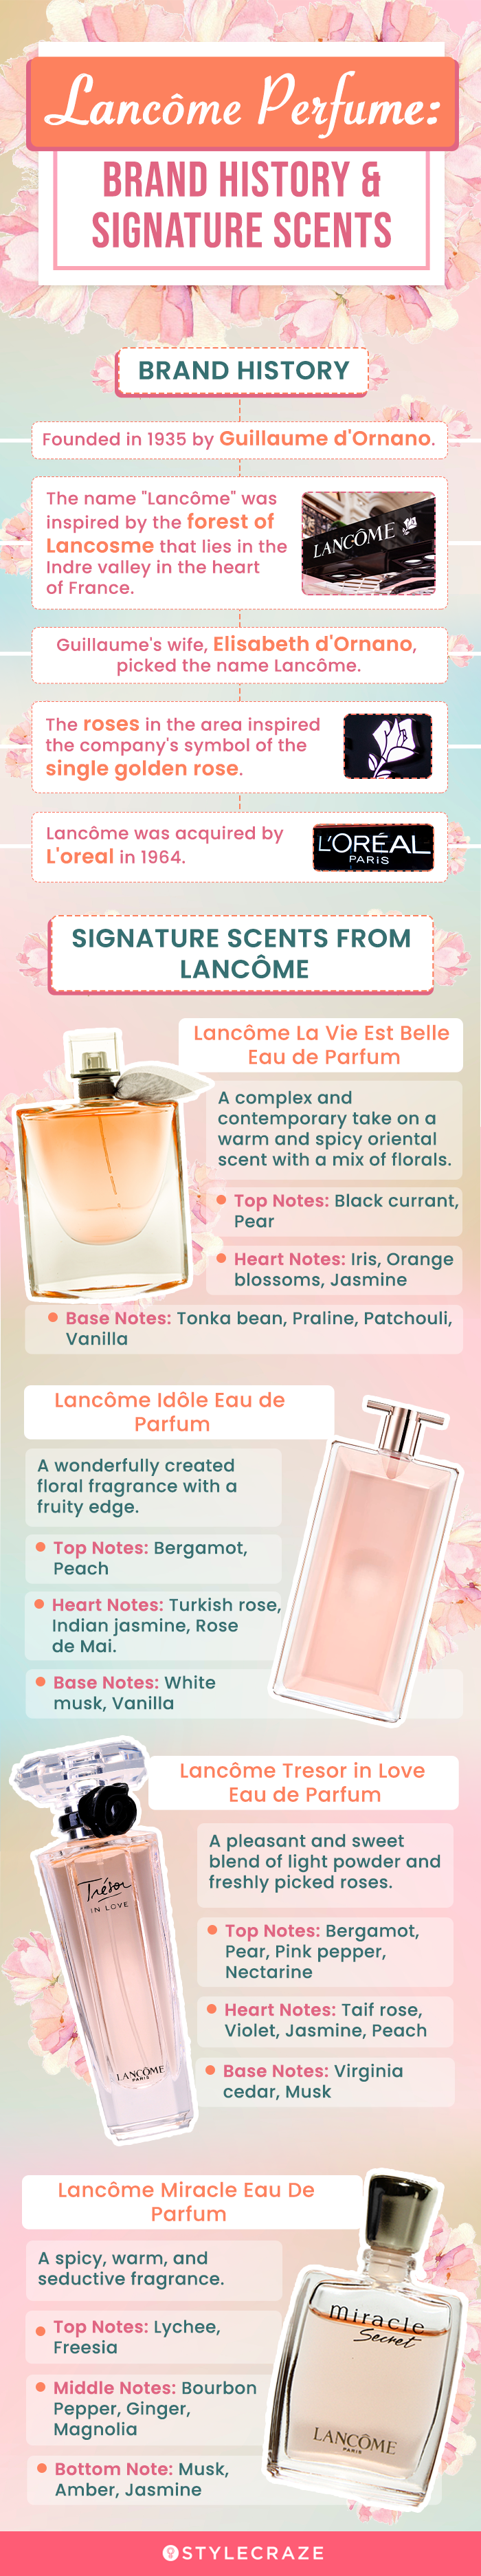 Lancôme Perfume: Brand History And Signature Scents  [infographic]